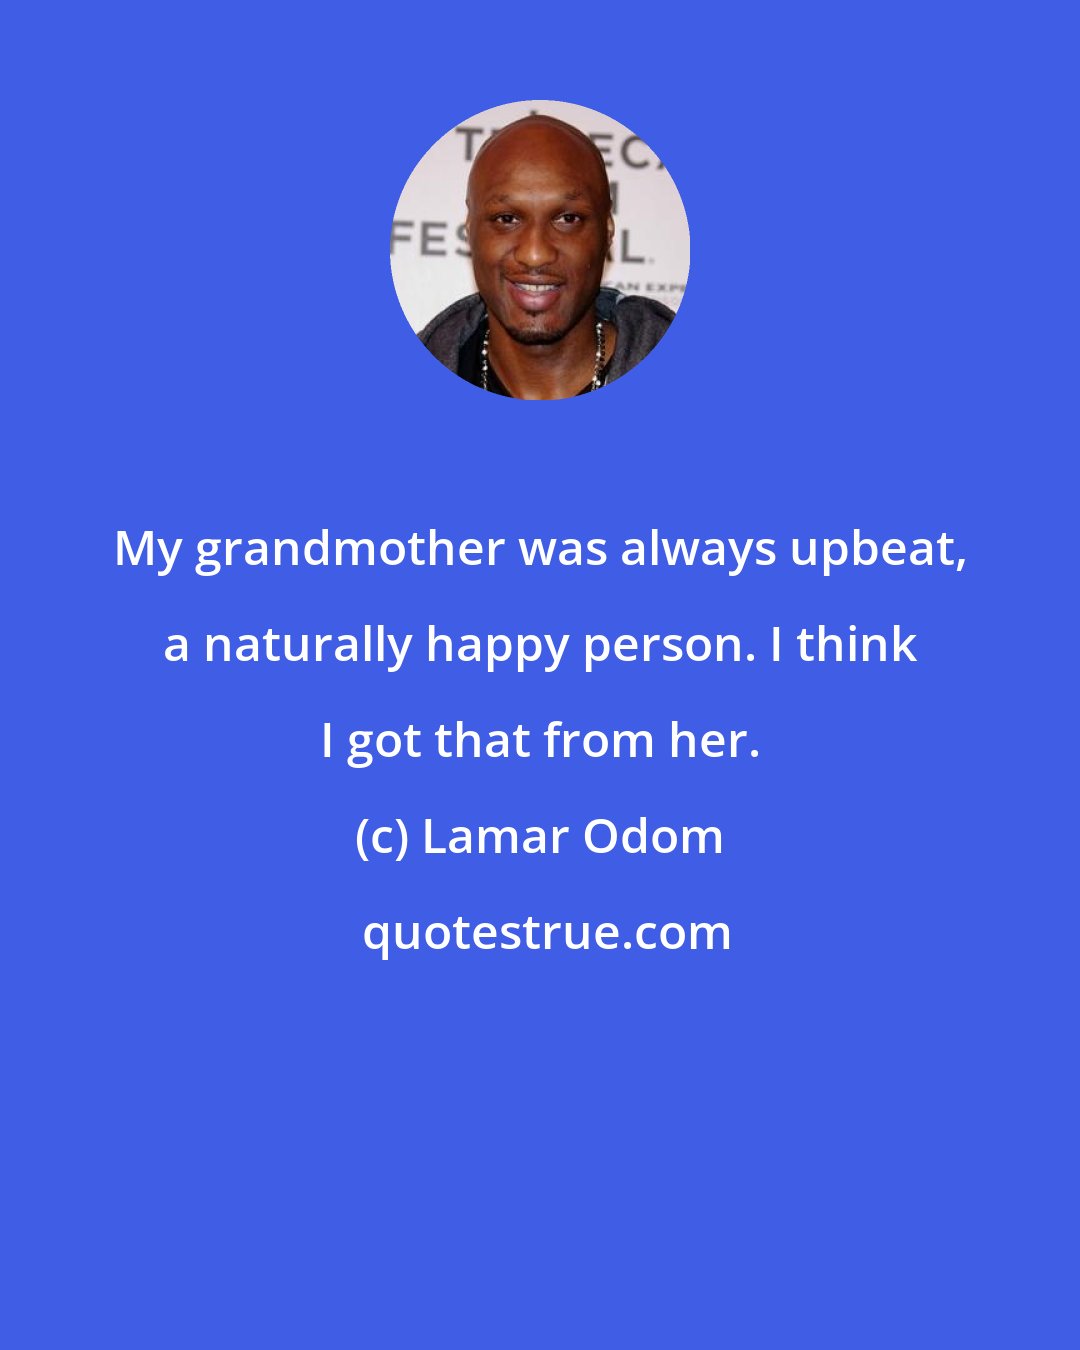 Lamar Odom: My grandmother was always upbeat, a naturally happy person. I think I got that from her.